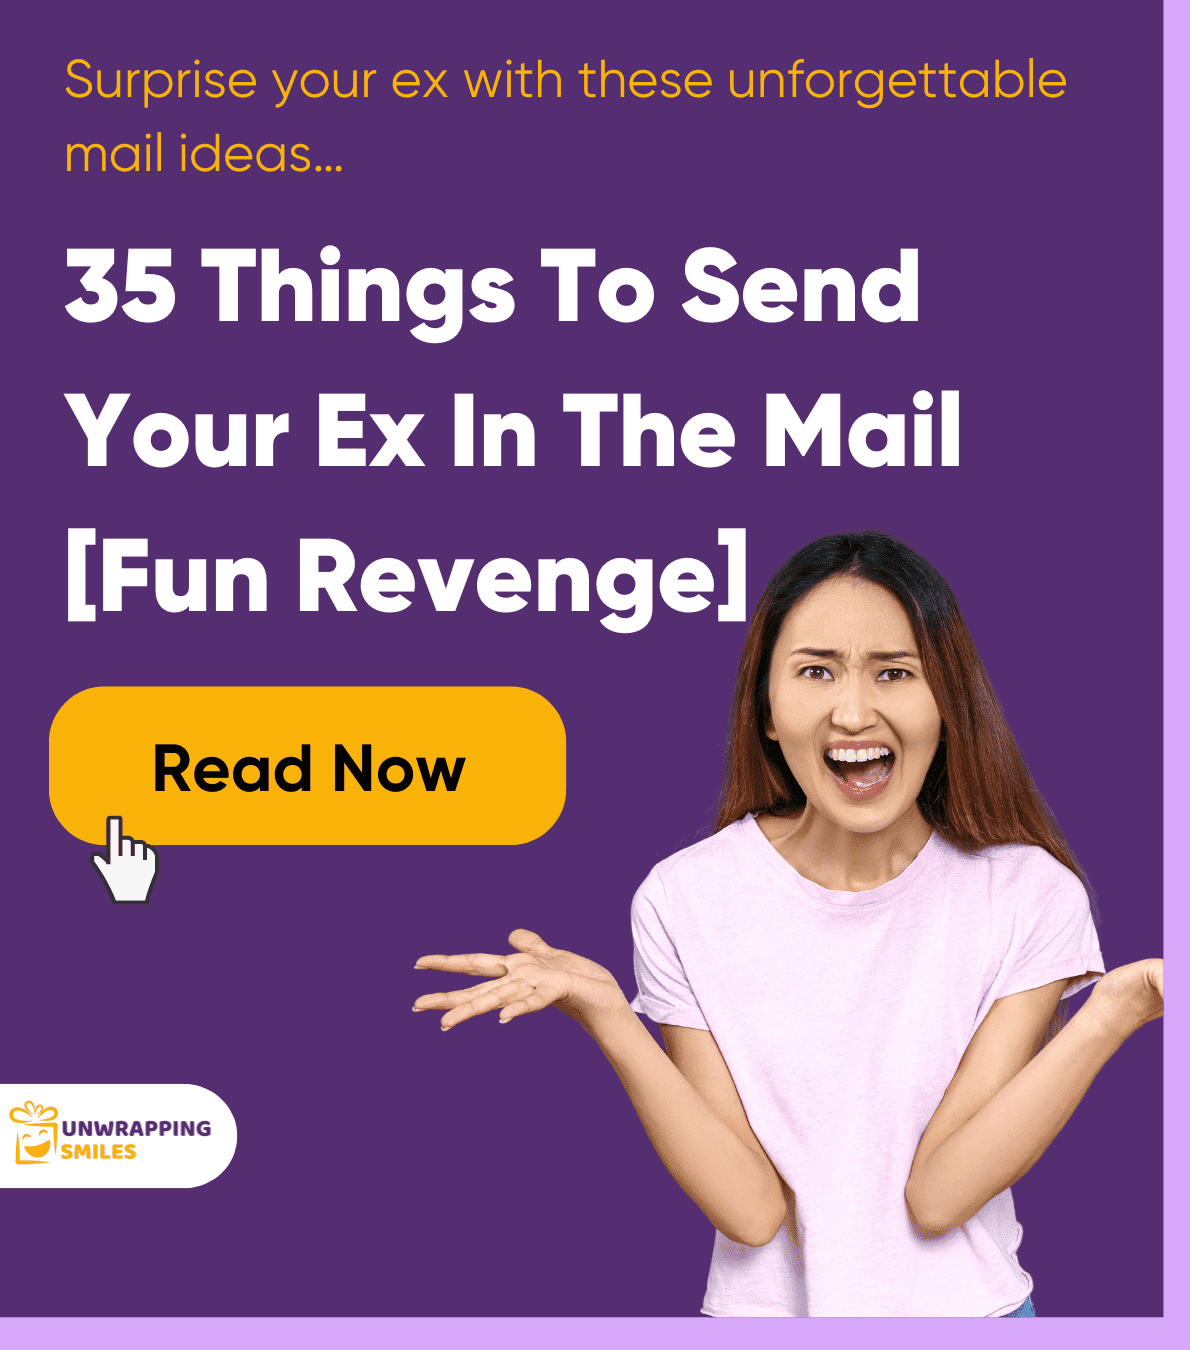 35 Things To Send Your Ex In The Mail